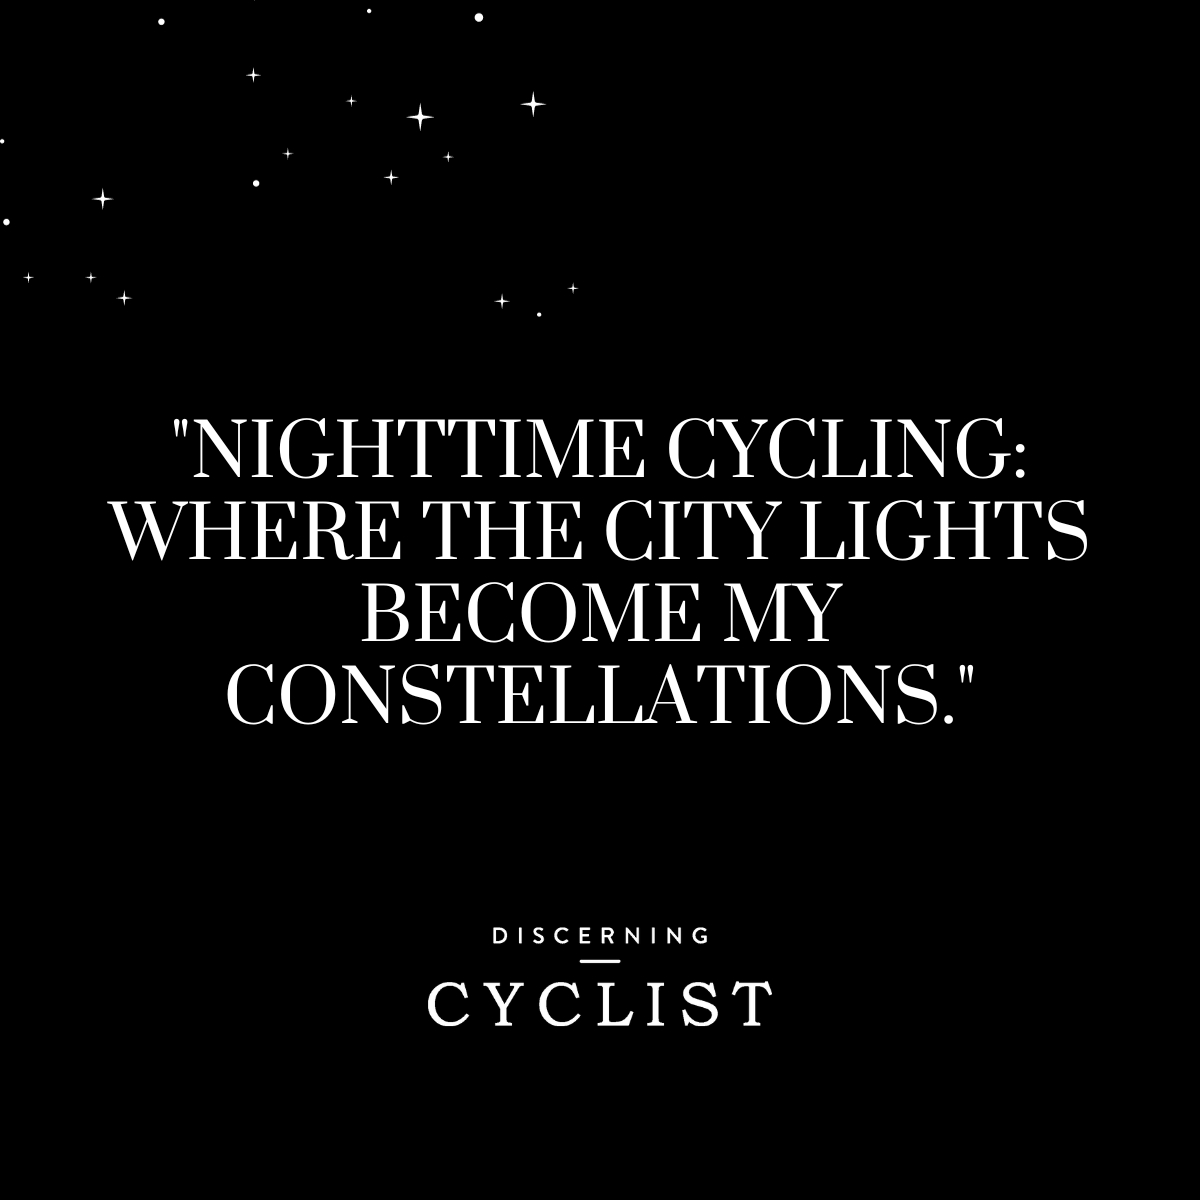 "Nighttime cycling: where the city lights become my constellations."